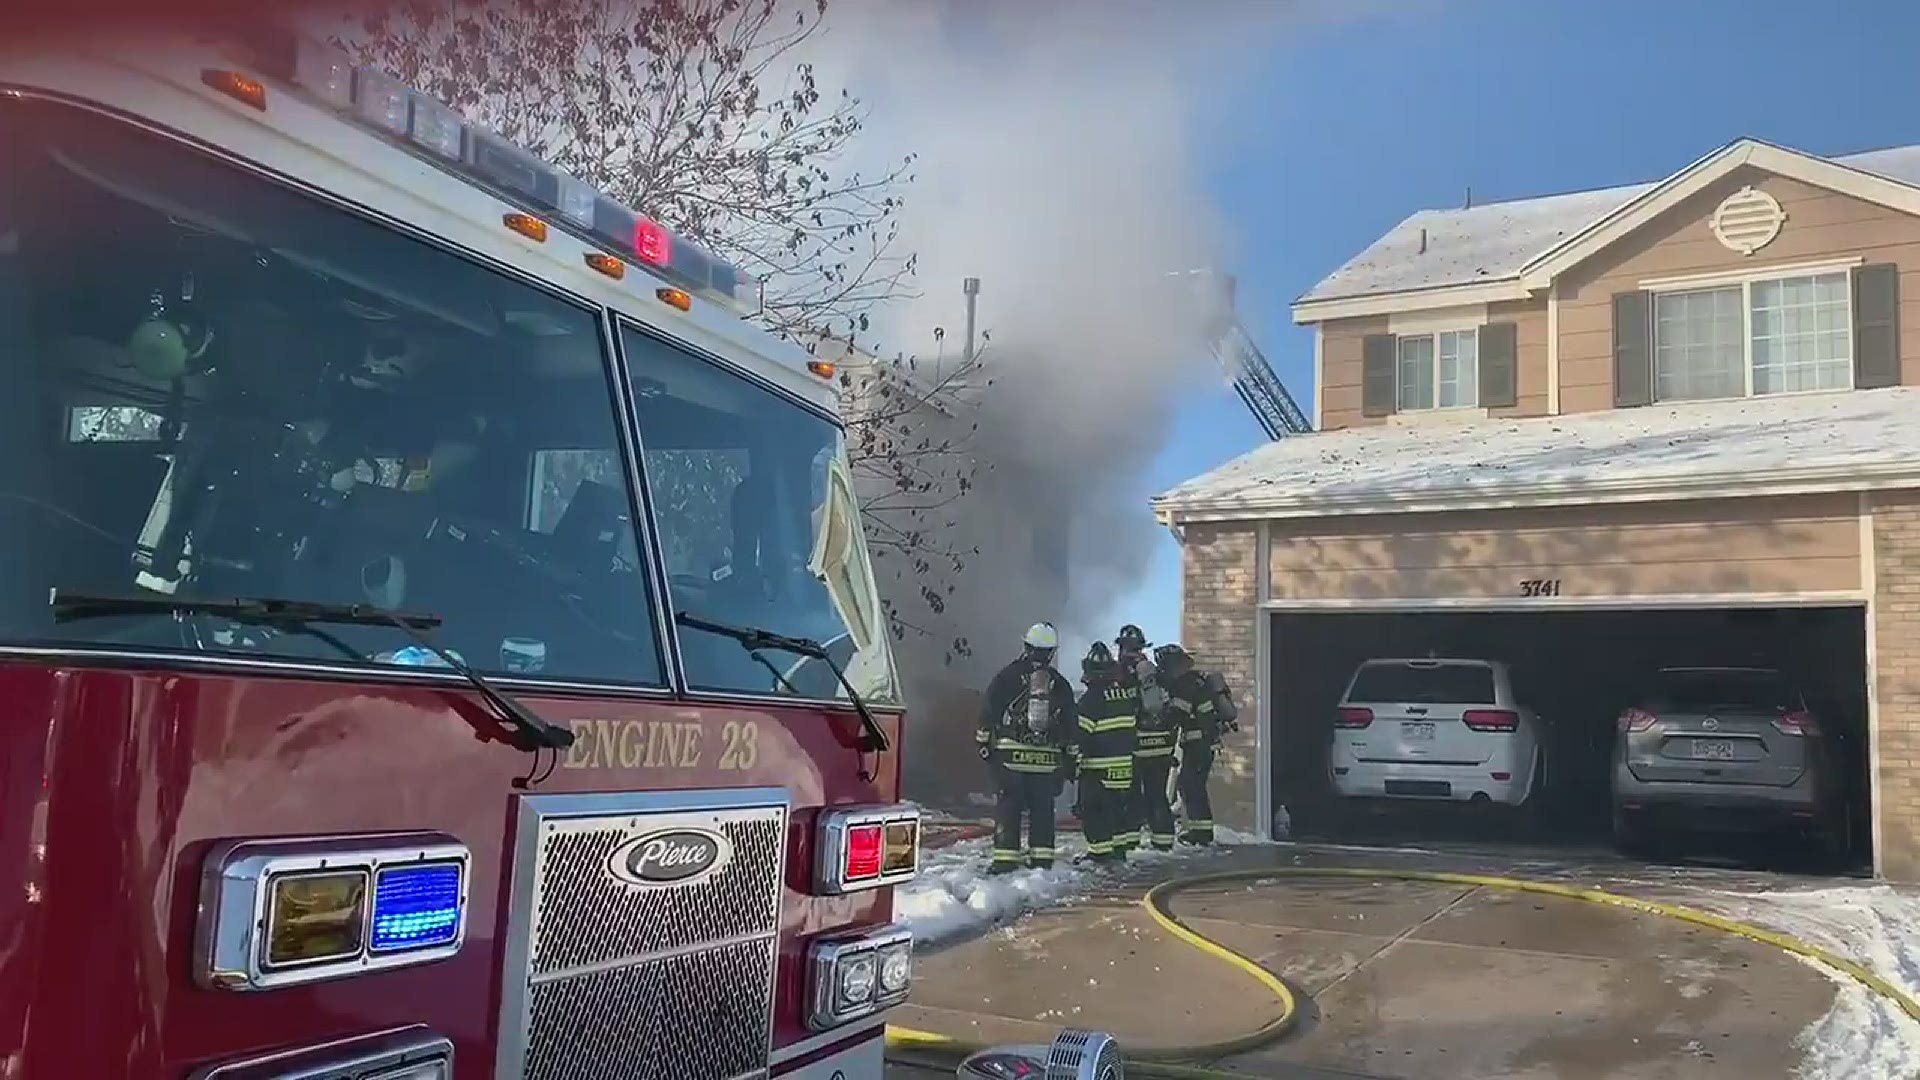 Two residents were transported to a hospital, and damage to the house was extensive, said South Metro Fire Rescue.